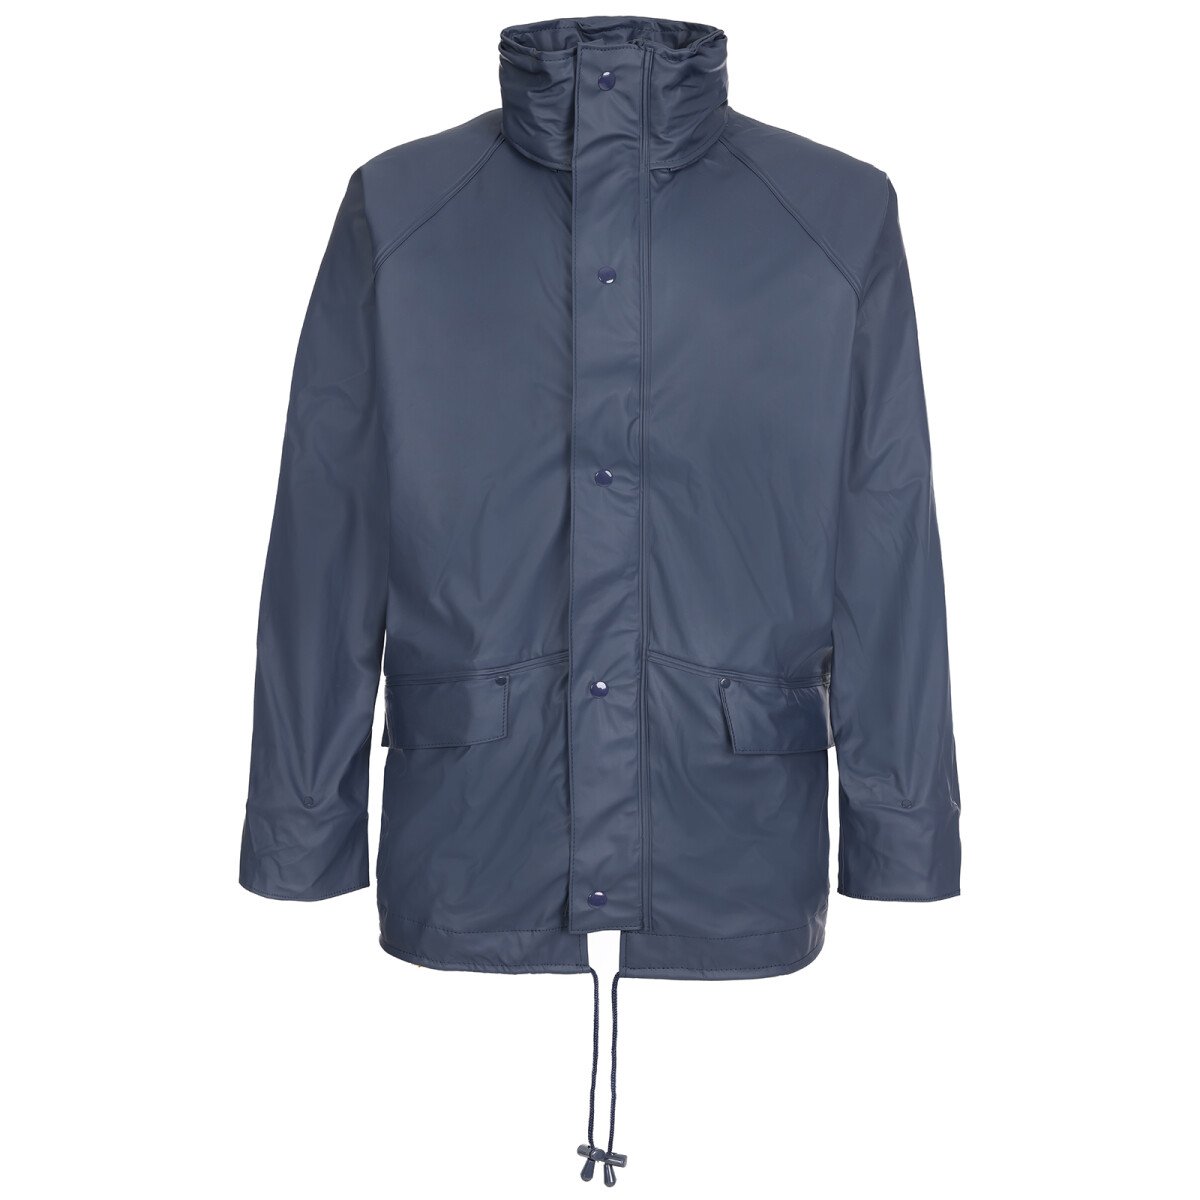 Fort 221 Airflex Jacket from Lawson HIS